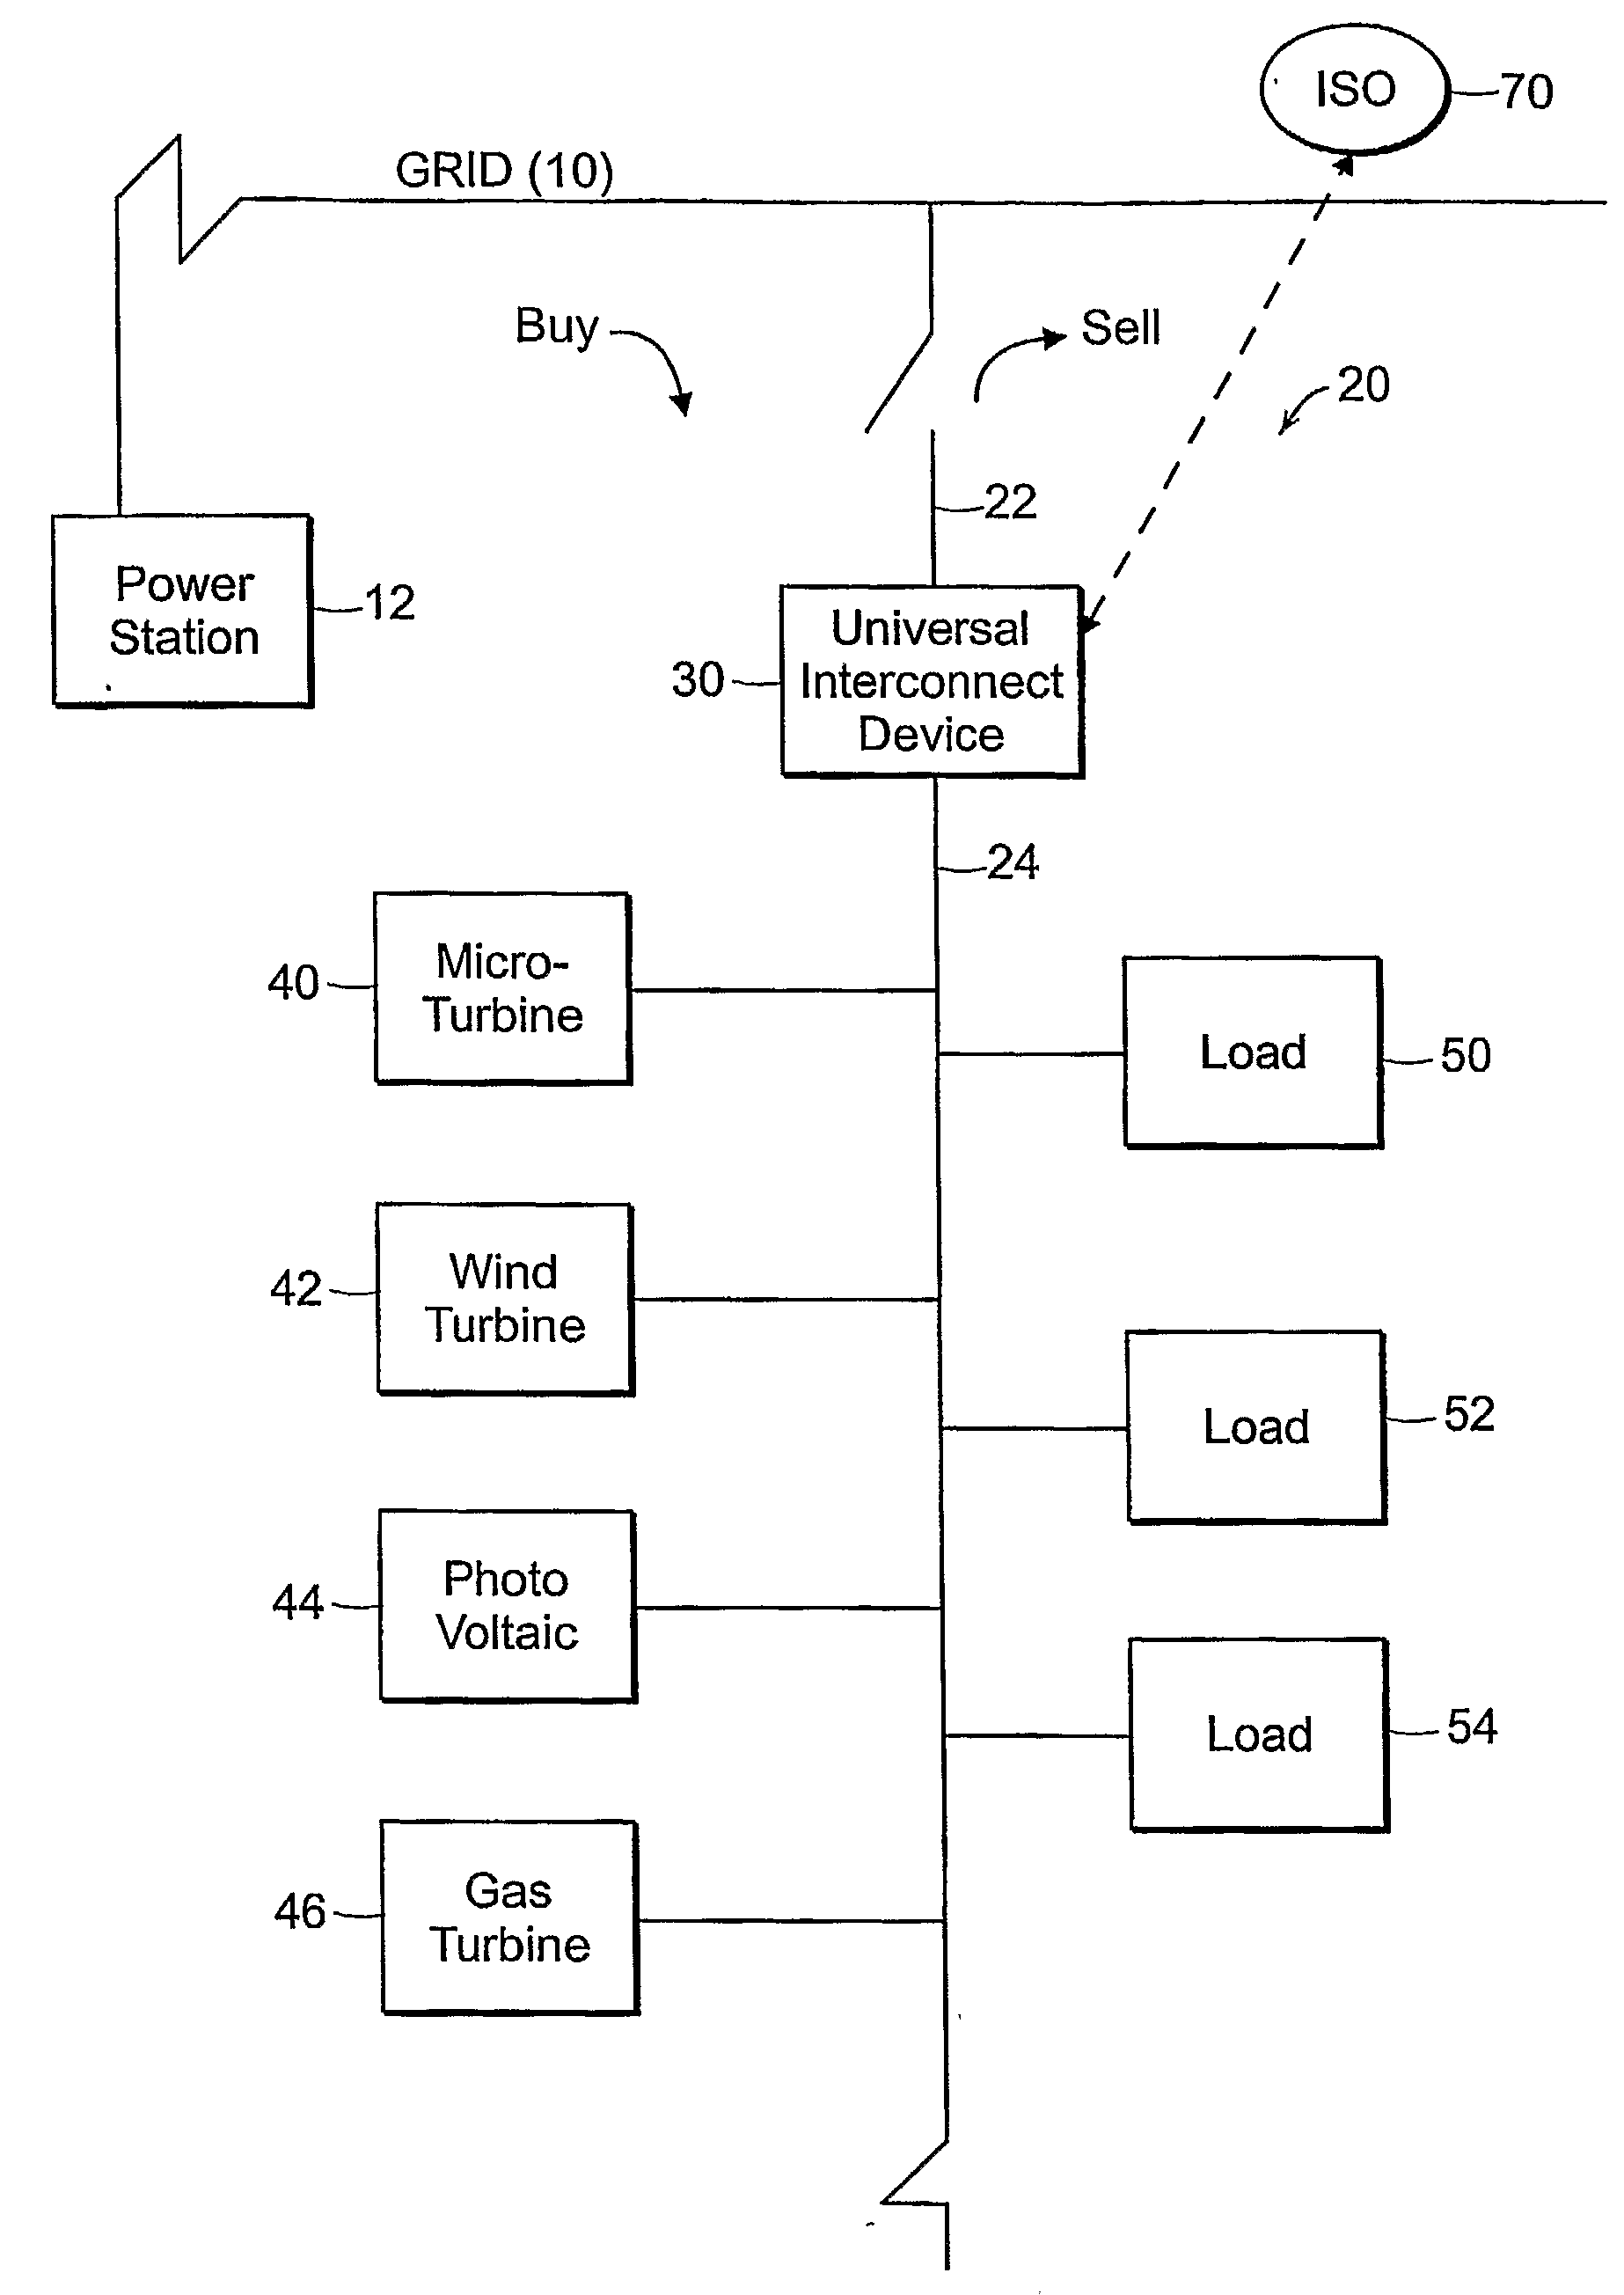 Methods and Systems for Intentionally Isolating Distributed Power Generation Sources